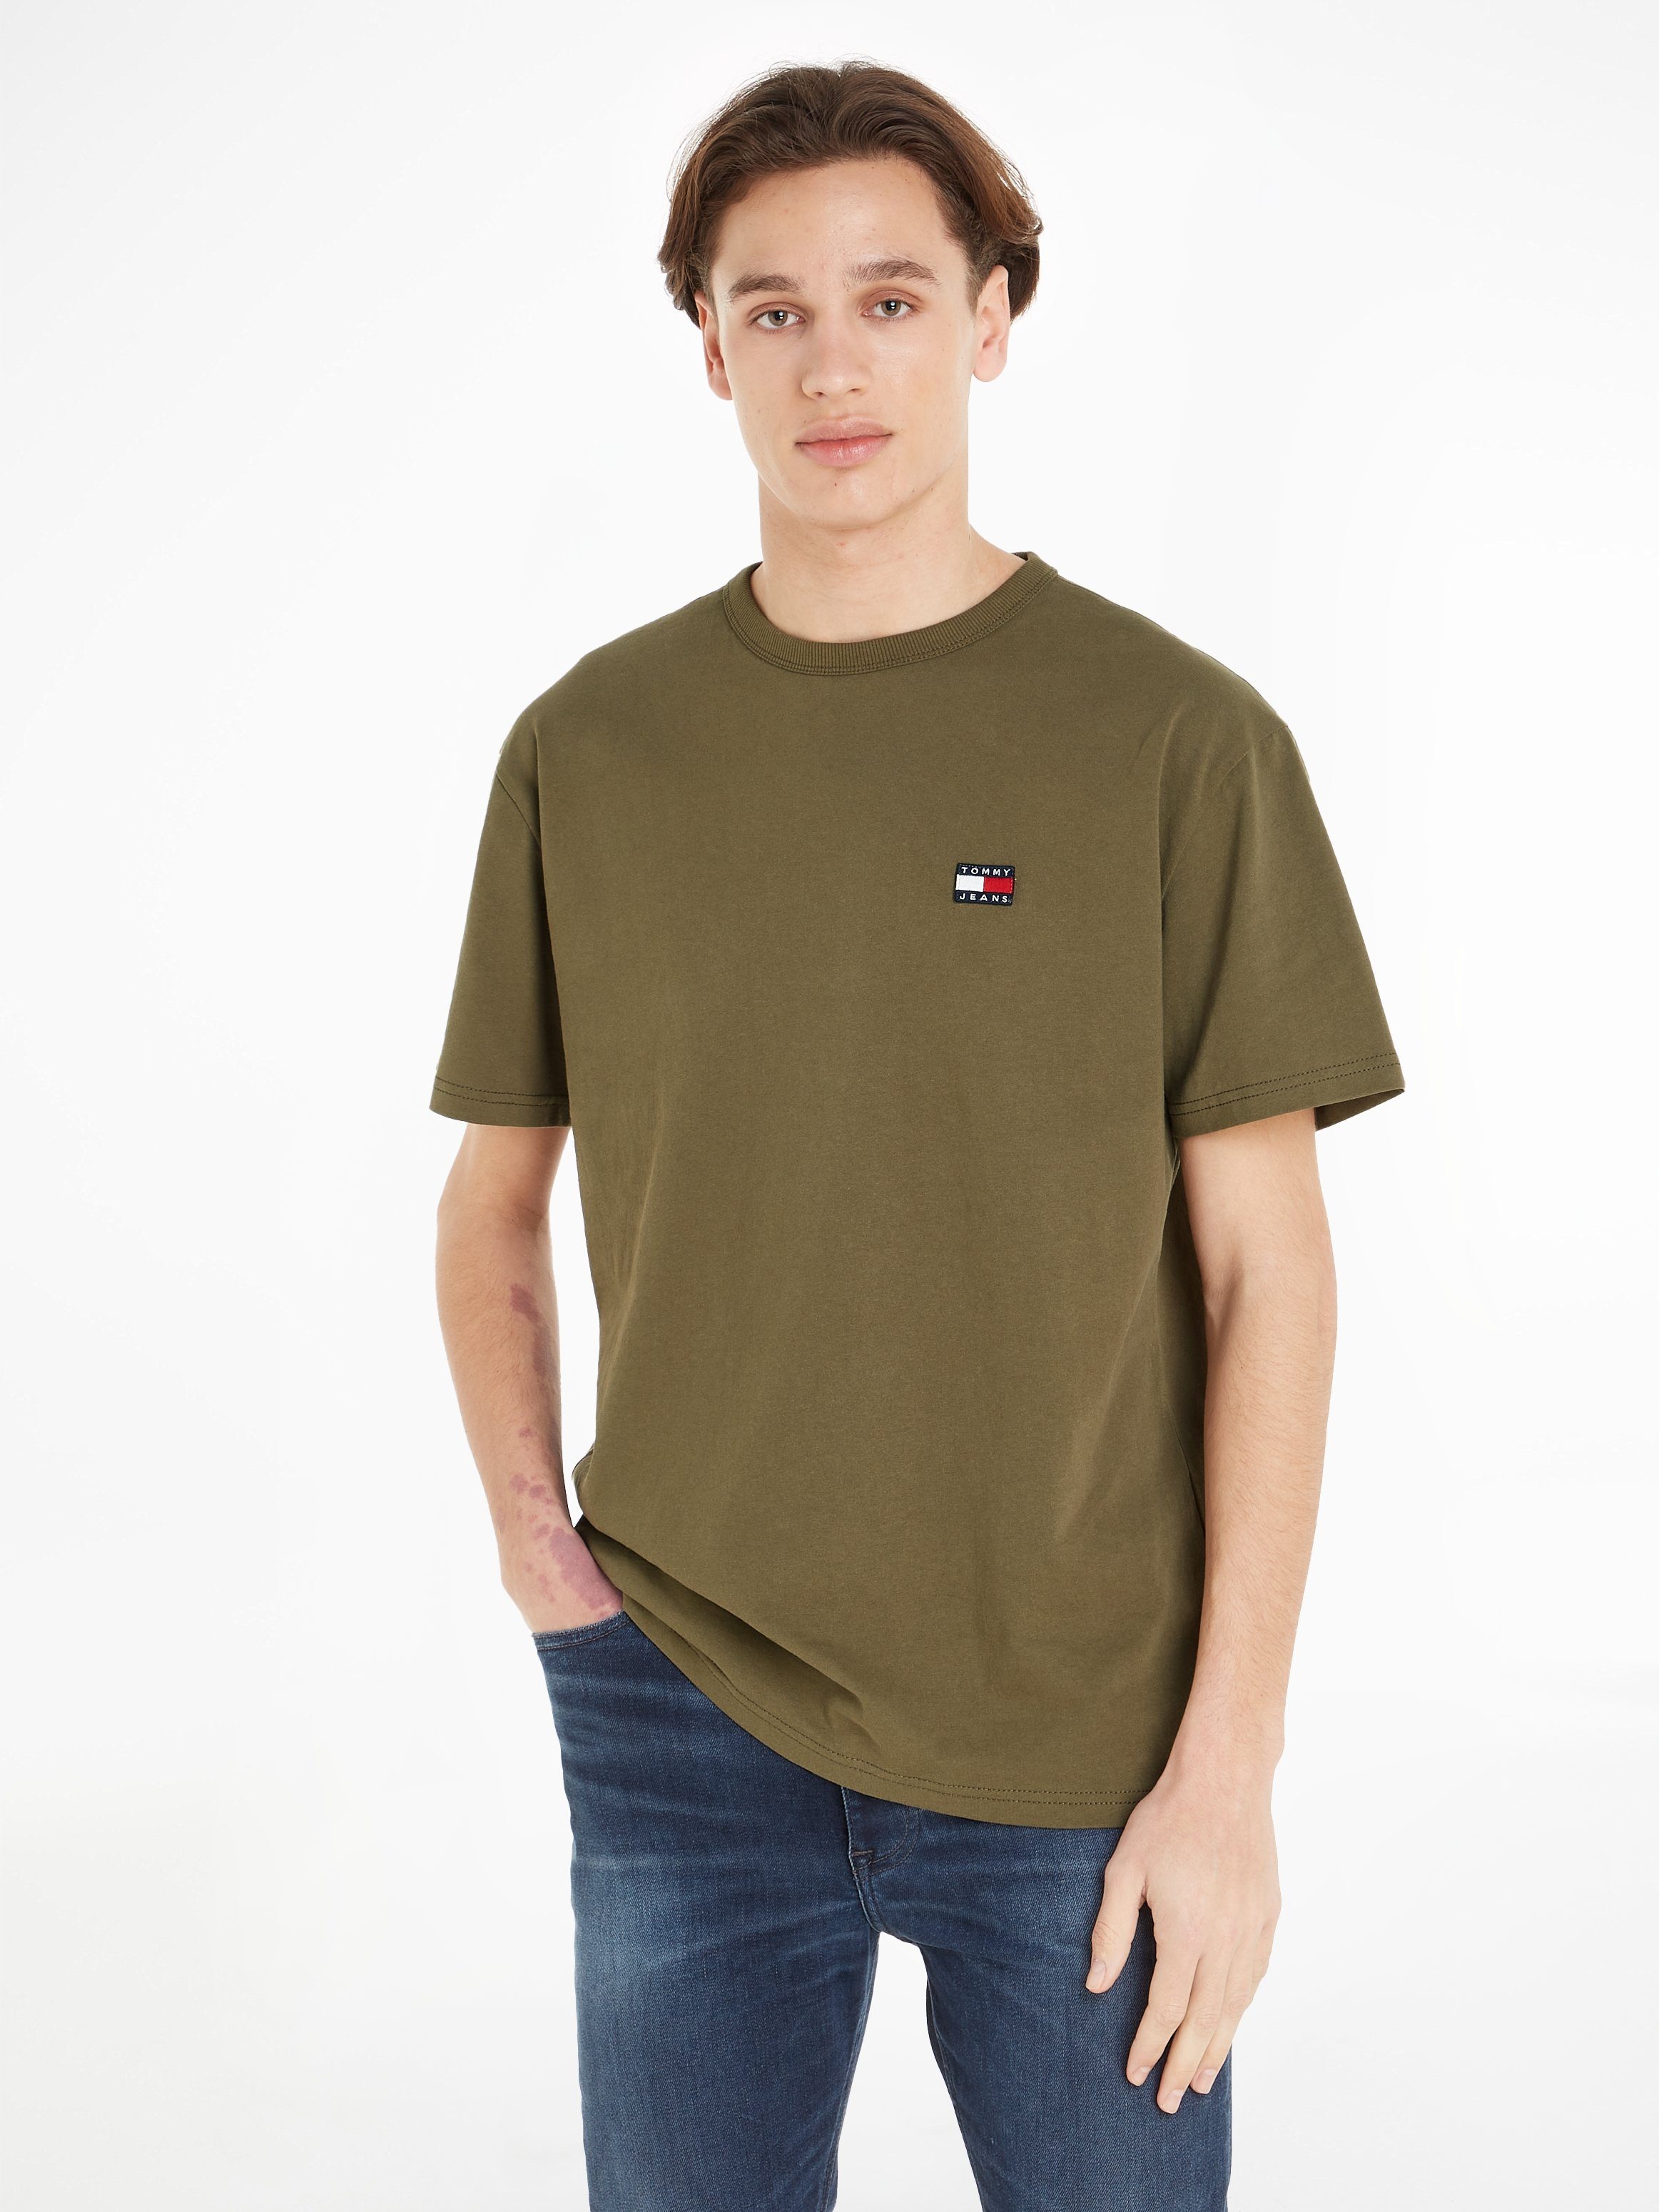 CLSC TOMMY T-Shirt XS Green Olive BADGE Drab Tommy TEE Jeans TJM